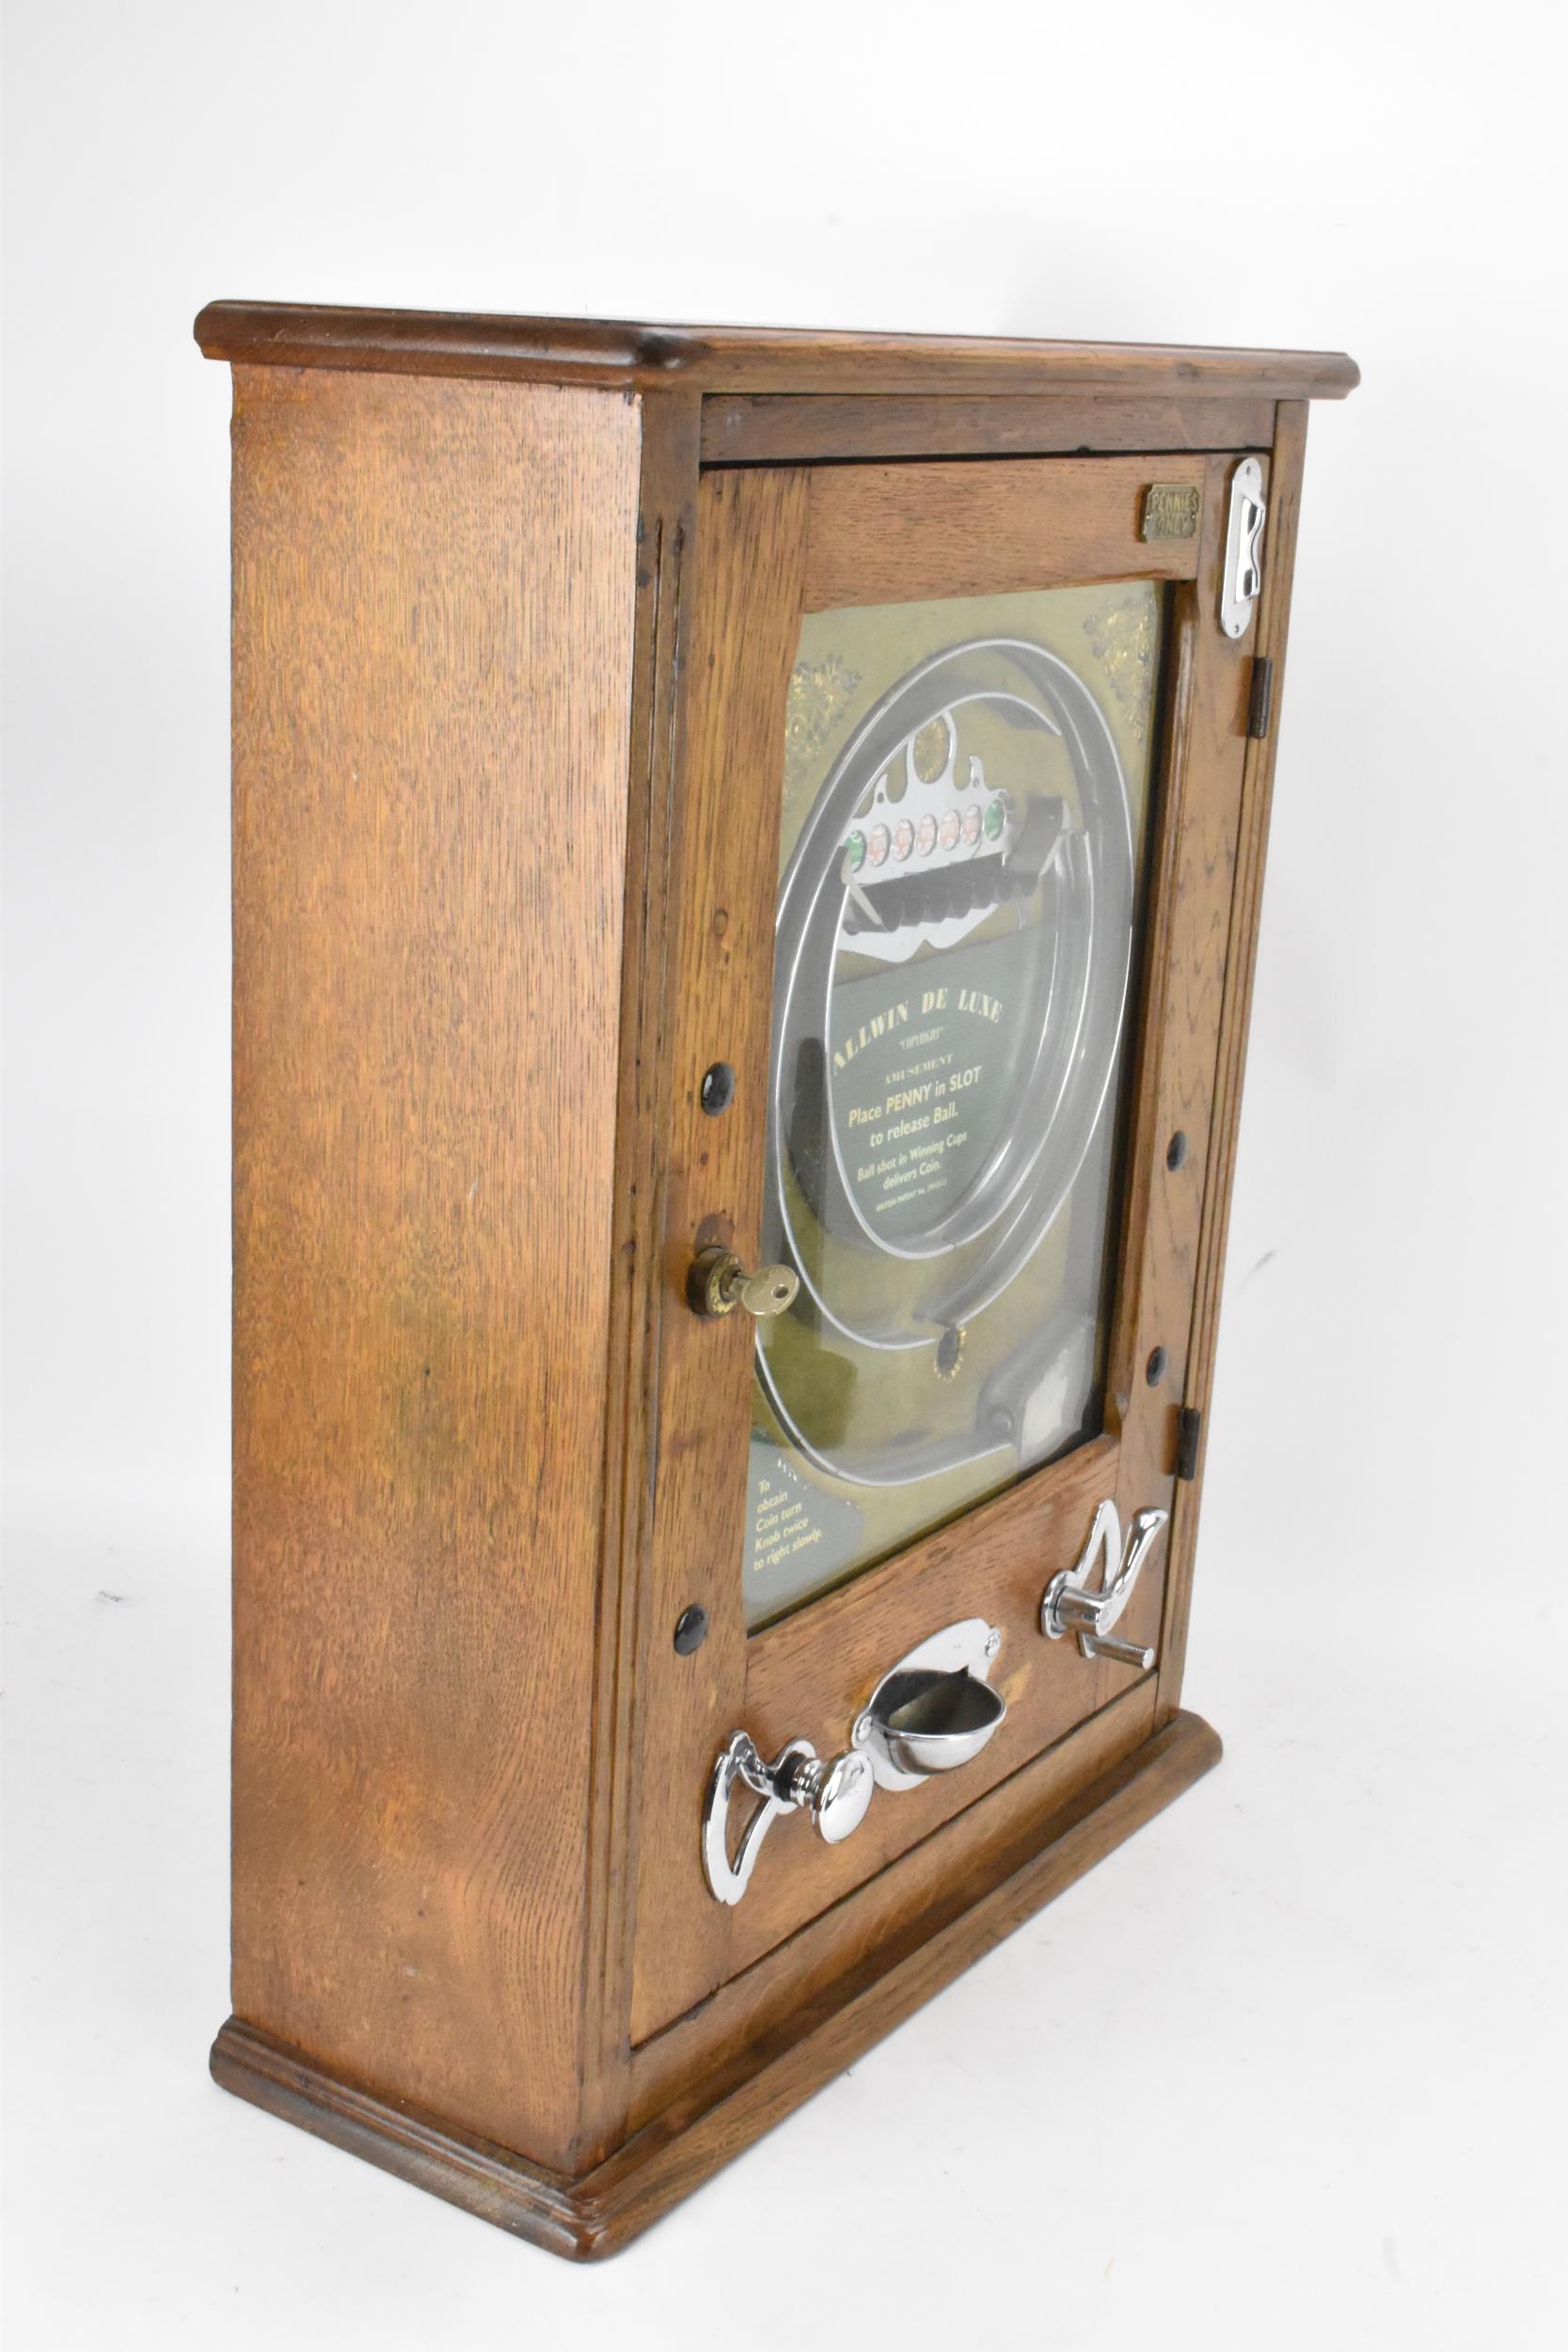 An Allwin De Luxe oak cased penny slot machine, circa 1920, with internal metal ball track, - Image 11 of 12